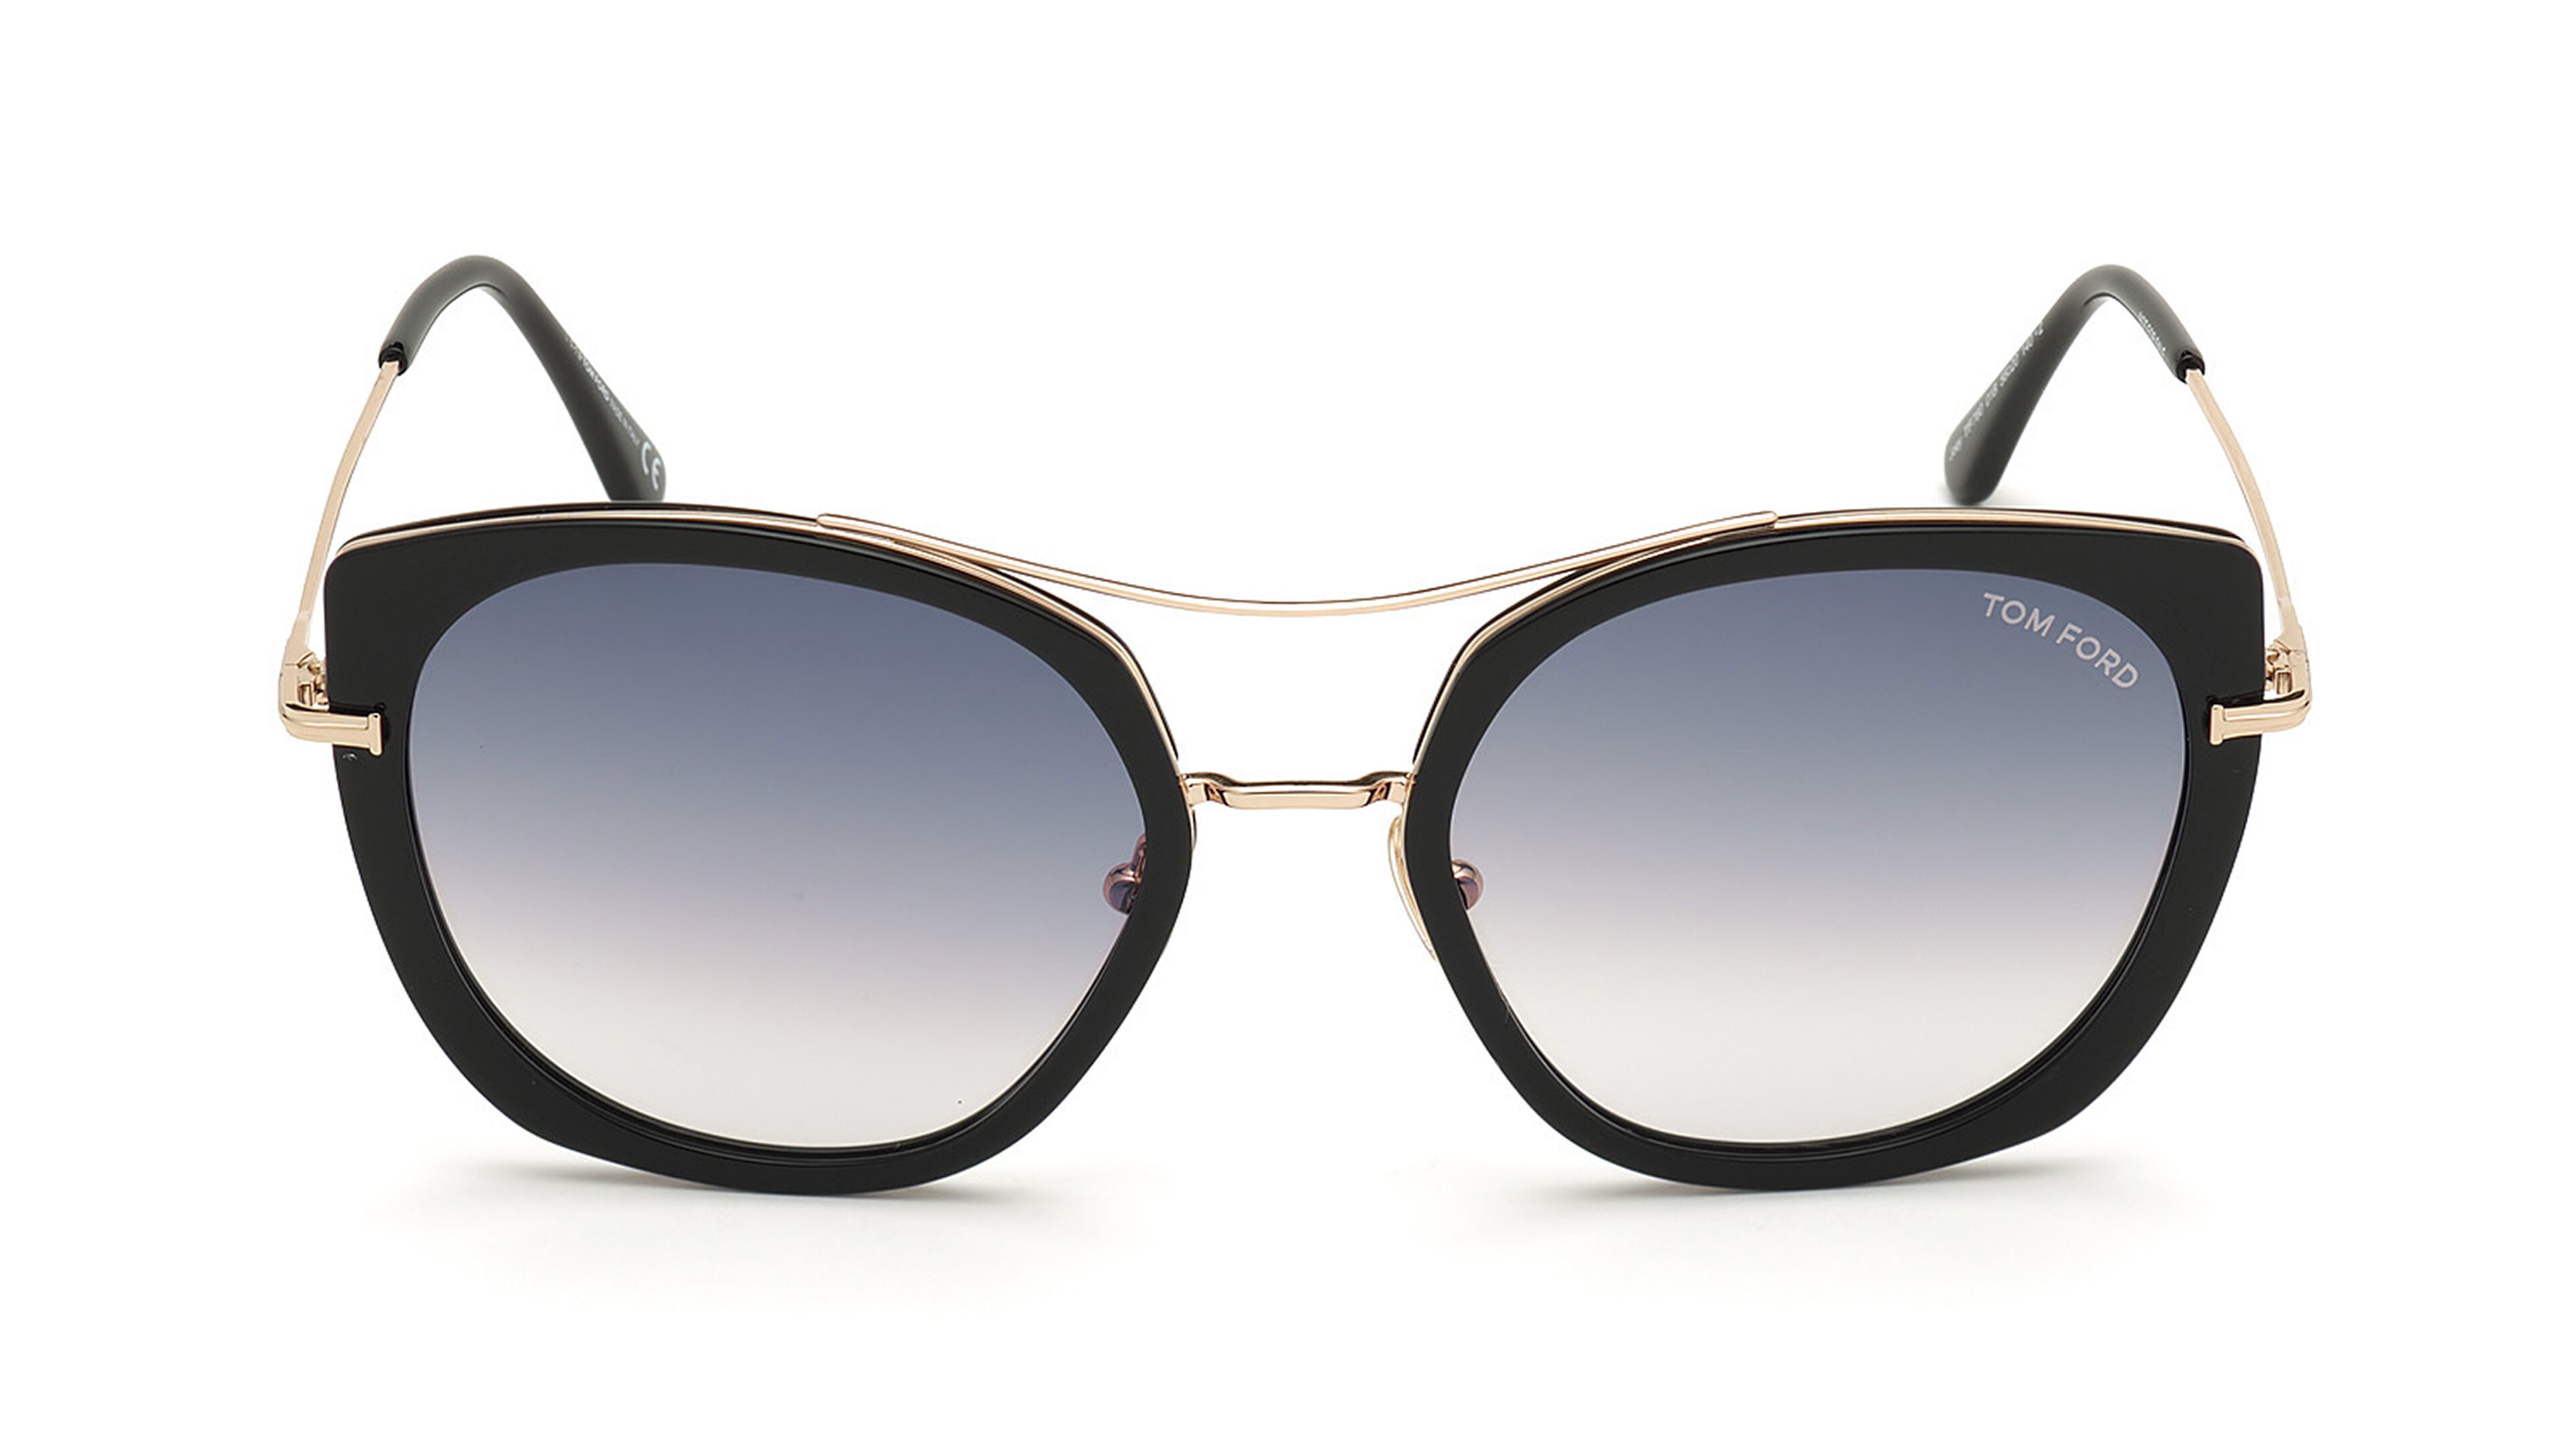 [products.image.front] Tom Ford FT0760 01B Sonnenbrille